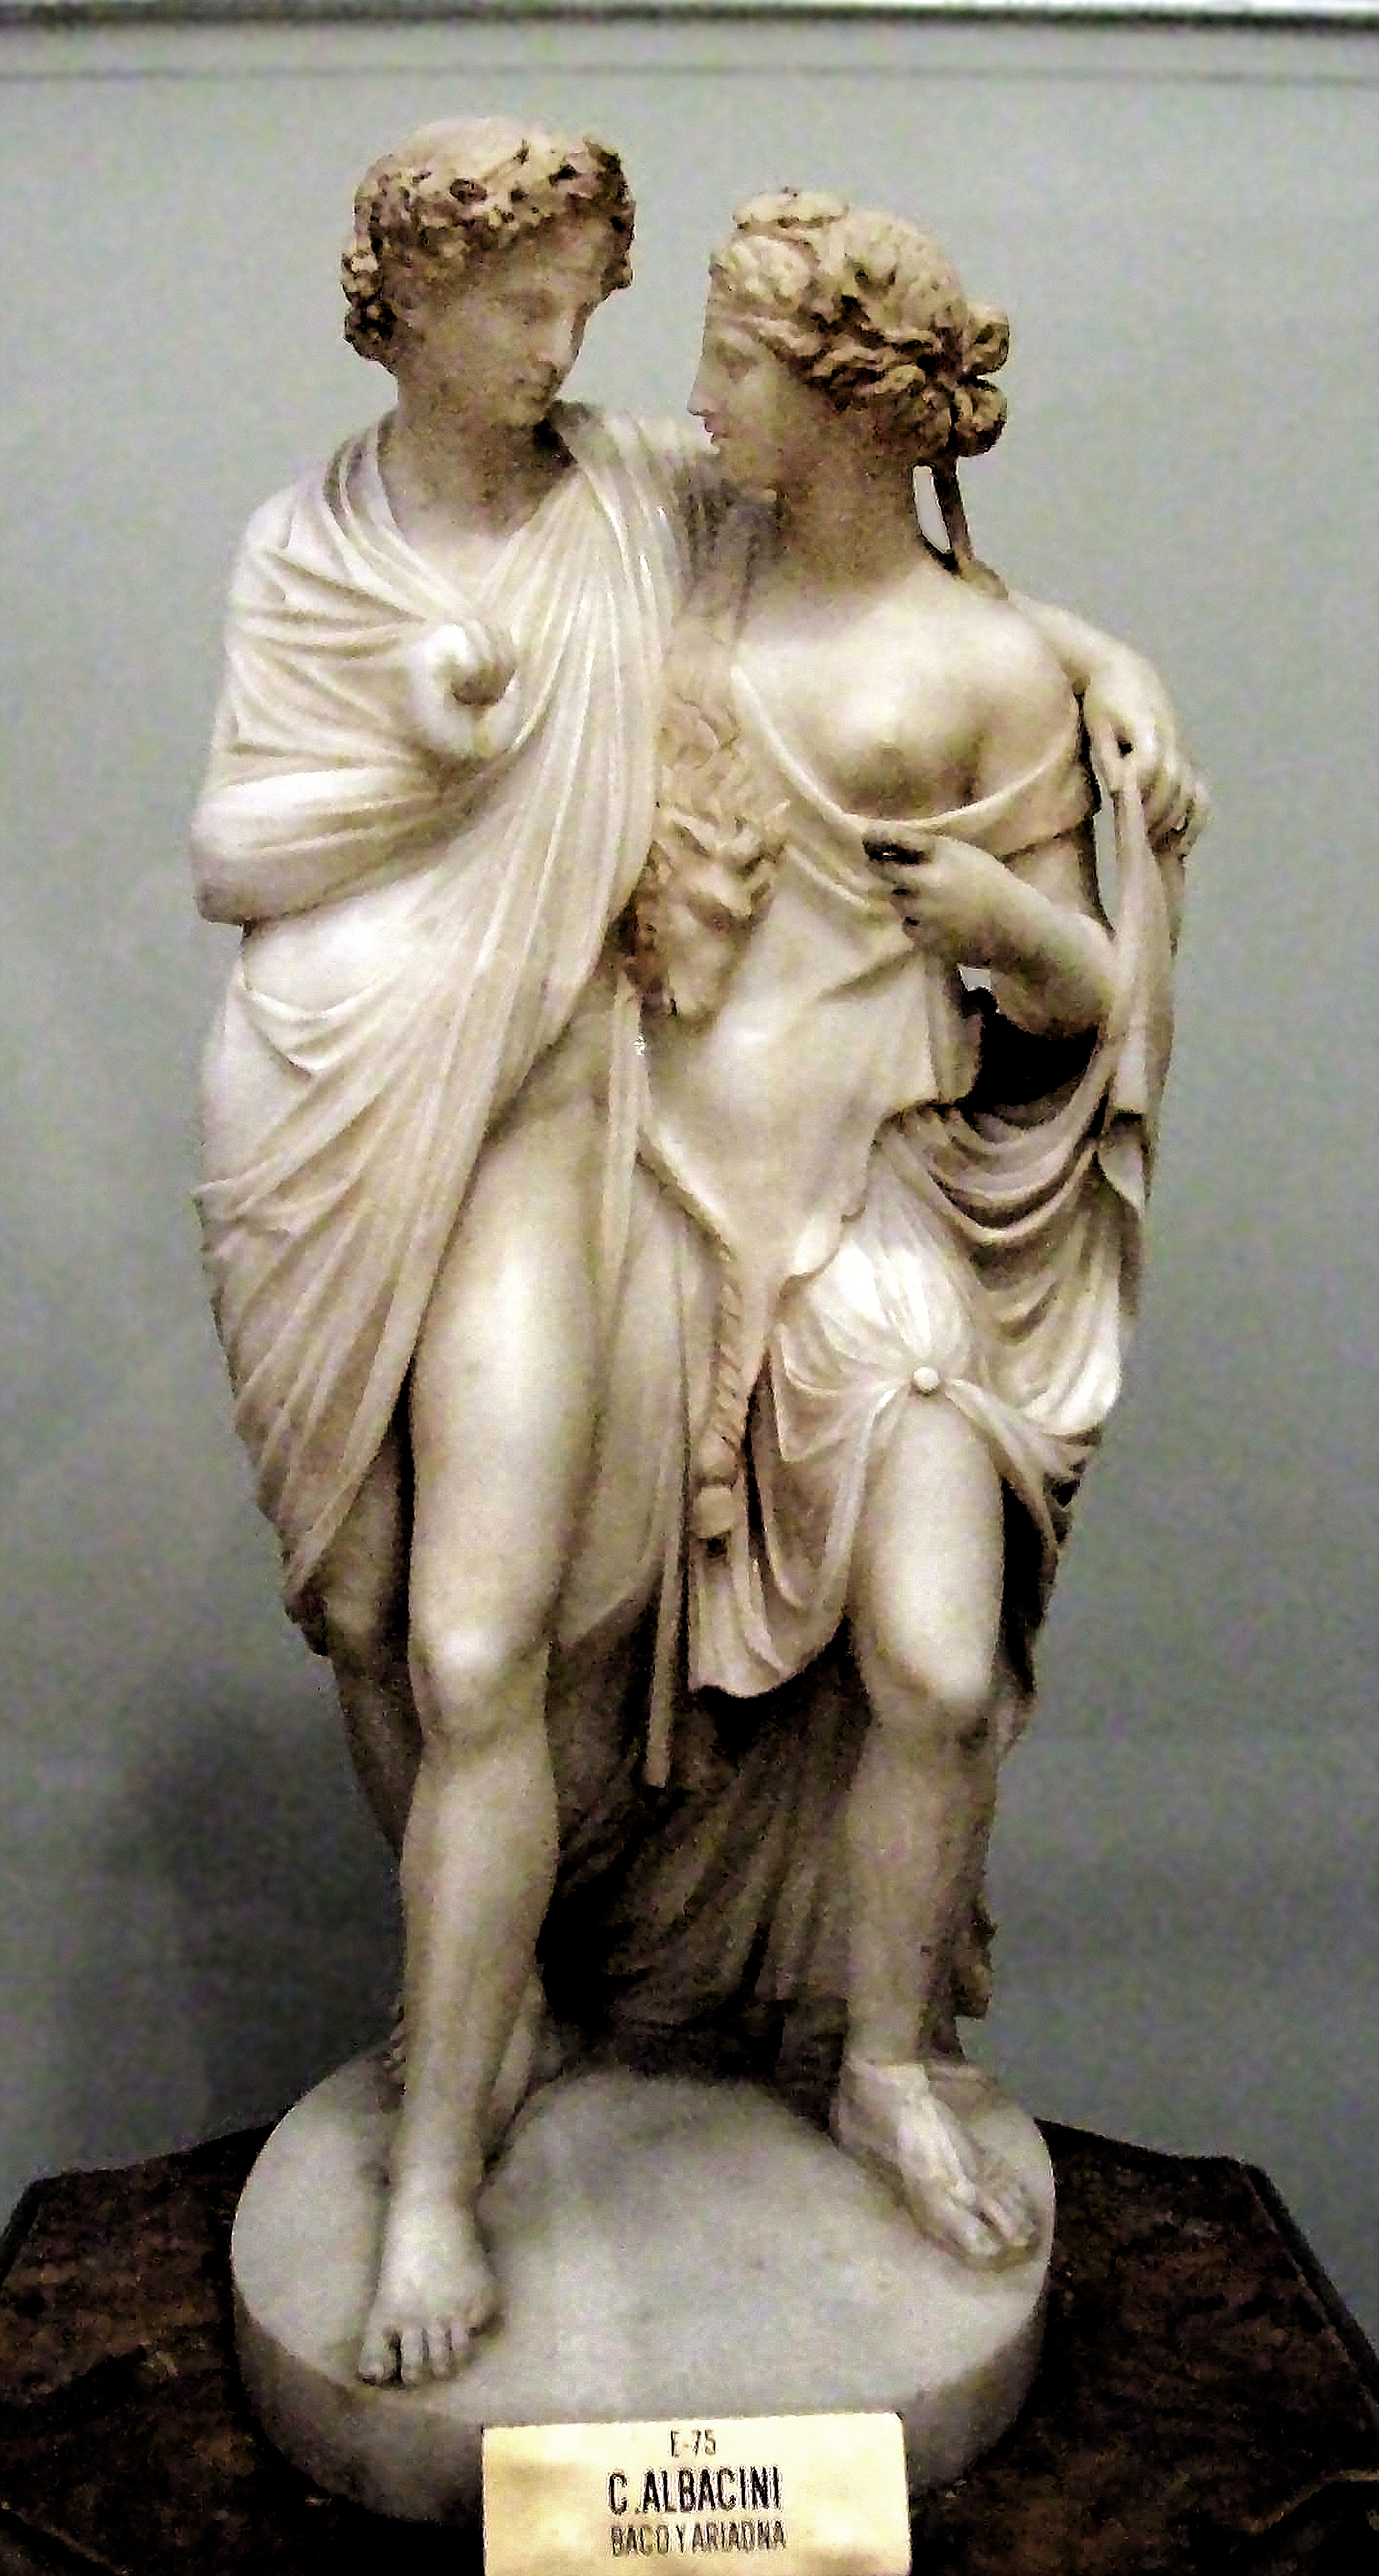 BACCHUS and ARIADNE, at the Museum of the Royal Academy of Fine Arts of San Fernando, in Madrid (Spain). Marble sculpture by Carlo Albacini (active between 1770 and 1807).. Dimensions: 70 x 32 x 30 cm.